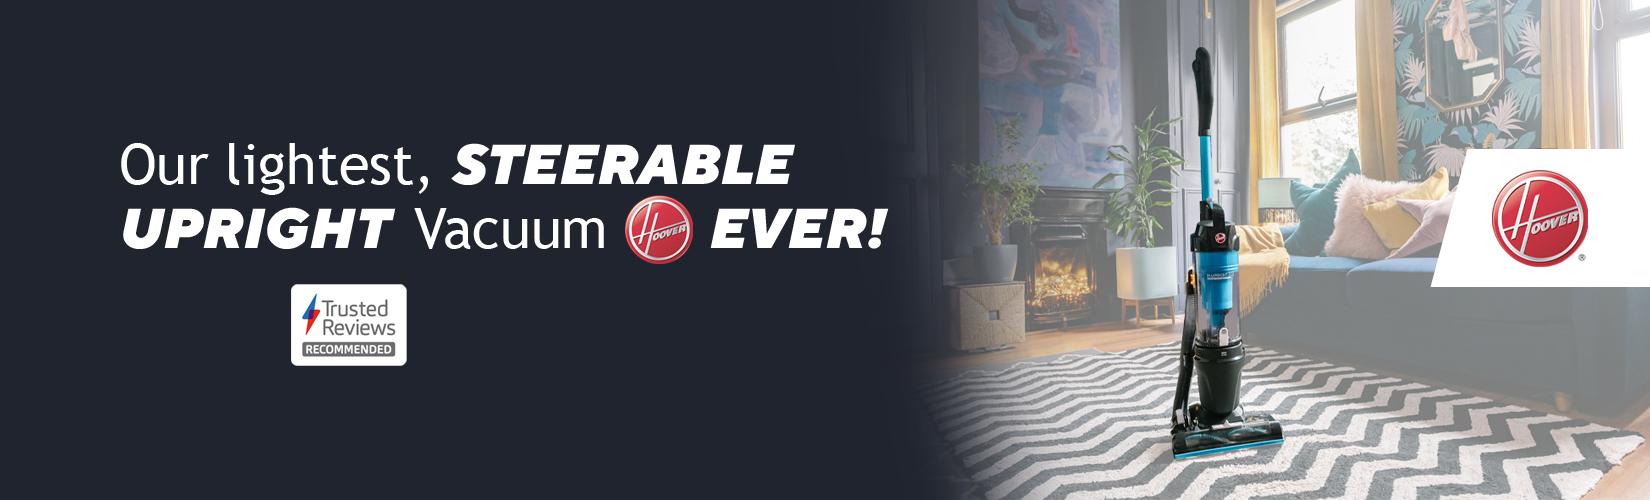 Our lightest, steerable upright Hoover vacuum ever!